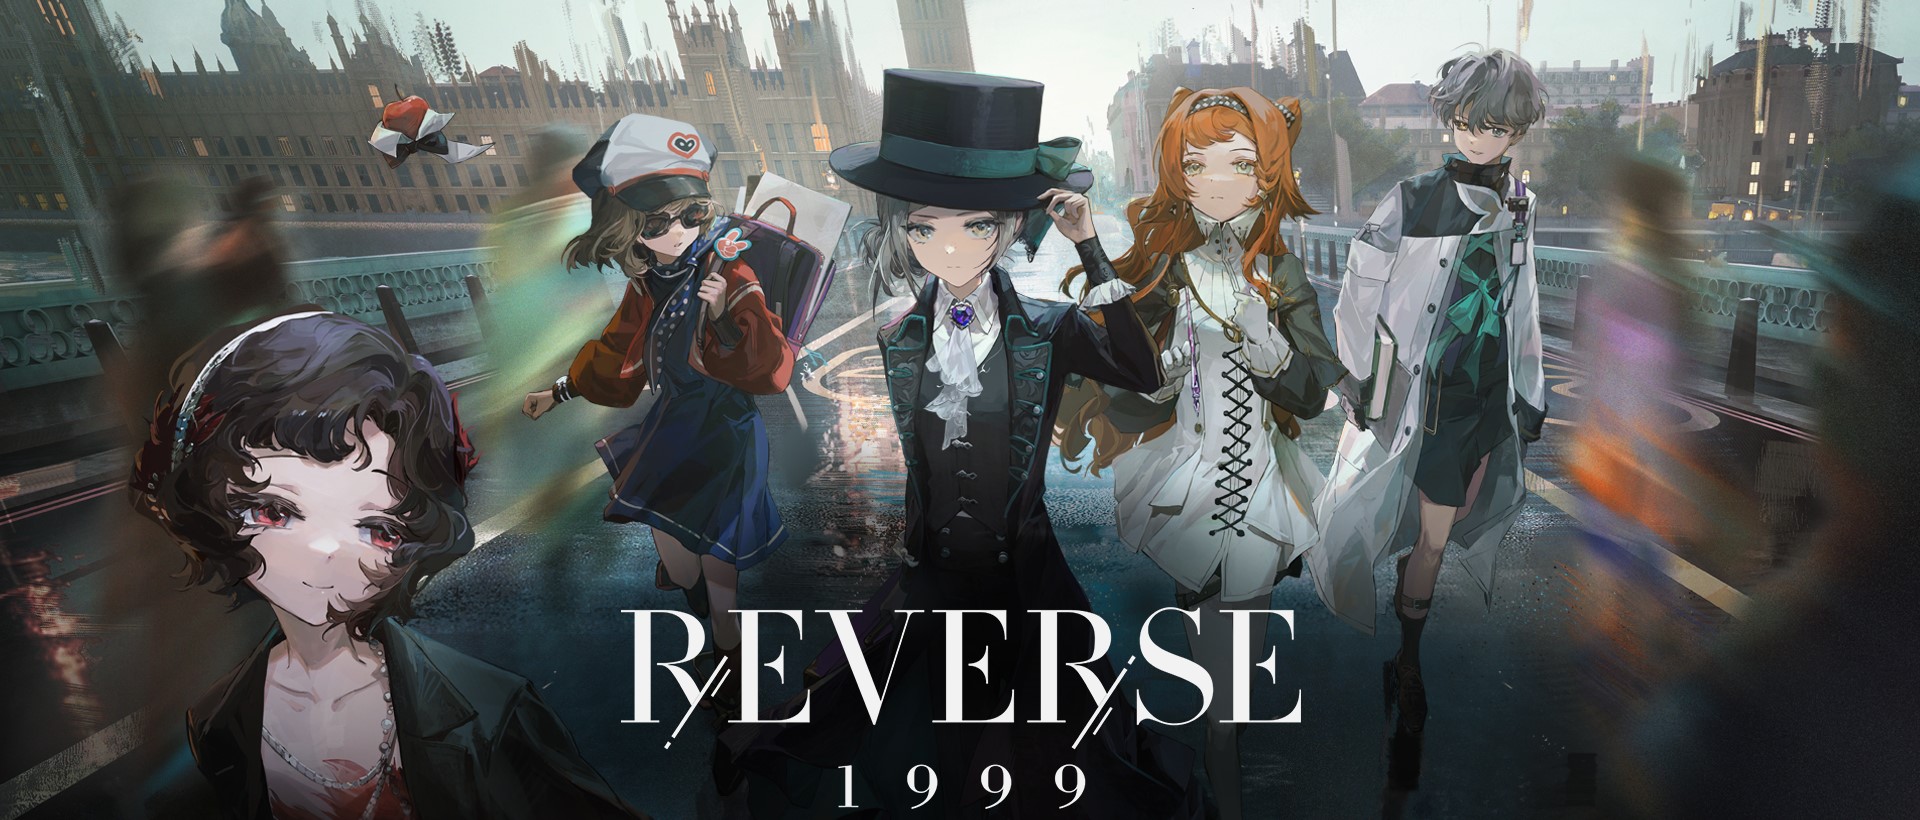 Download & Play Reverse: 1999 on PC & Mac with NoxPlayer (Emulator)